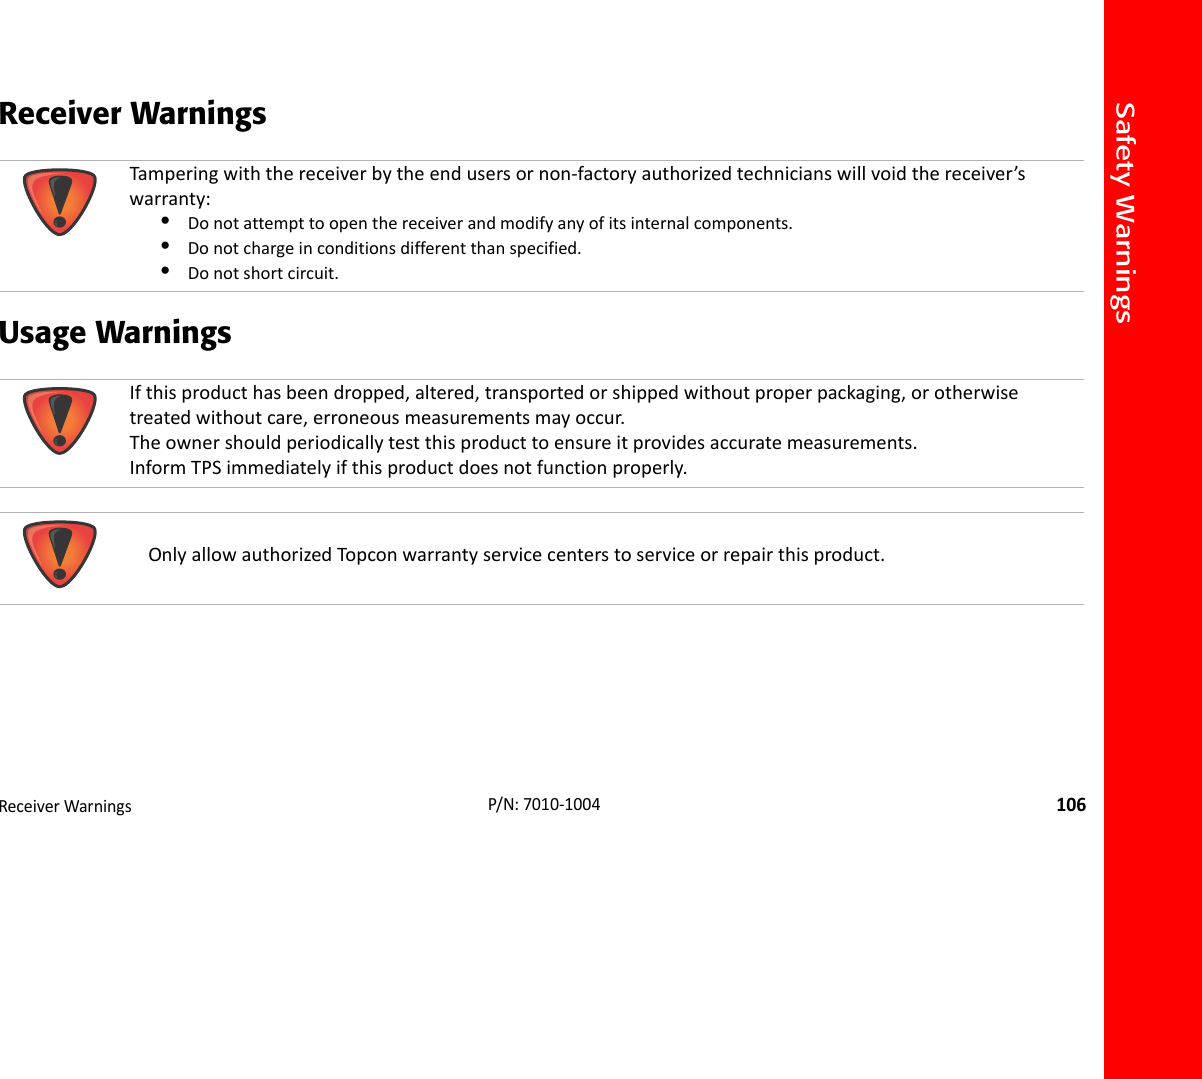 Safety WarningsReceiverWarnings106P/N:7010‐1004Receiver Warnings Usage Warnings  Tamperingwiththereceiverbytheendusersornon‐factoryauthorizedtechnicianswillvoidthereceiver’swarranty:•Donotattempttoopenthereceiverandmodifyanyofitsinternalcomponents.•Donotchargeinconditionsdifferentthanspecified.•Donotshortcircuit.Ifthisproducthasbeendropped,altered,transportedorshippedwithoutproperpackaging,orotherwisetreatedwithoutcare,erroneousmeasurementsmayoccur.Theownershouldperiodicallytestthisproducttoensureitprovidesaccuratemeasurements.InformTPSimmediatelyifthisproductdoesnotfunctionproperly.OnlyallowauthorizedTopconwarrantyservicecenterstoserviceorrepairthisproduct.